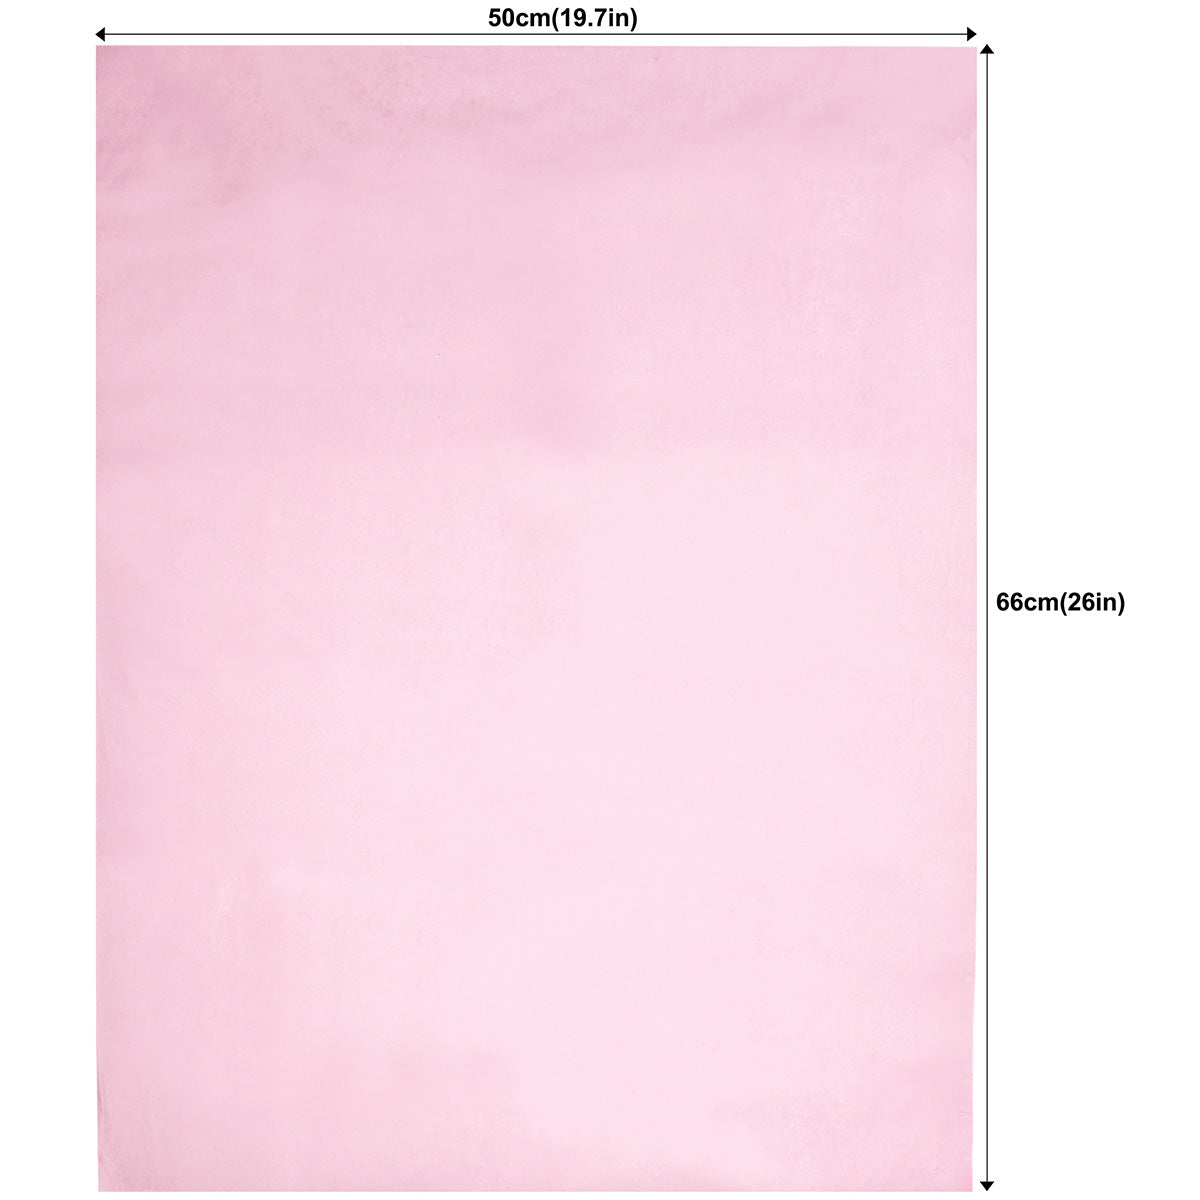 50 Sheets Pink Wrapping Tissue Paper